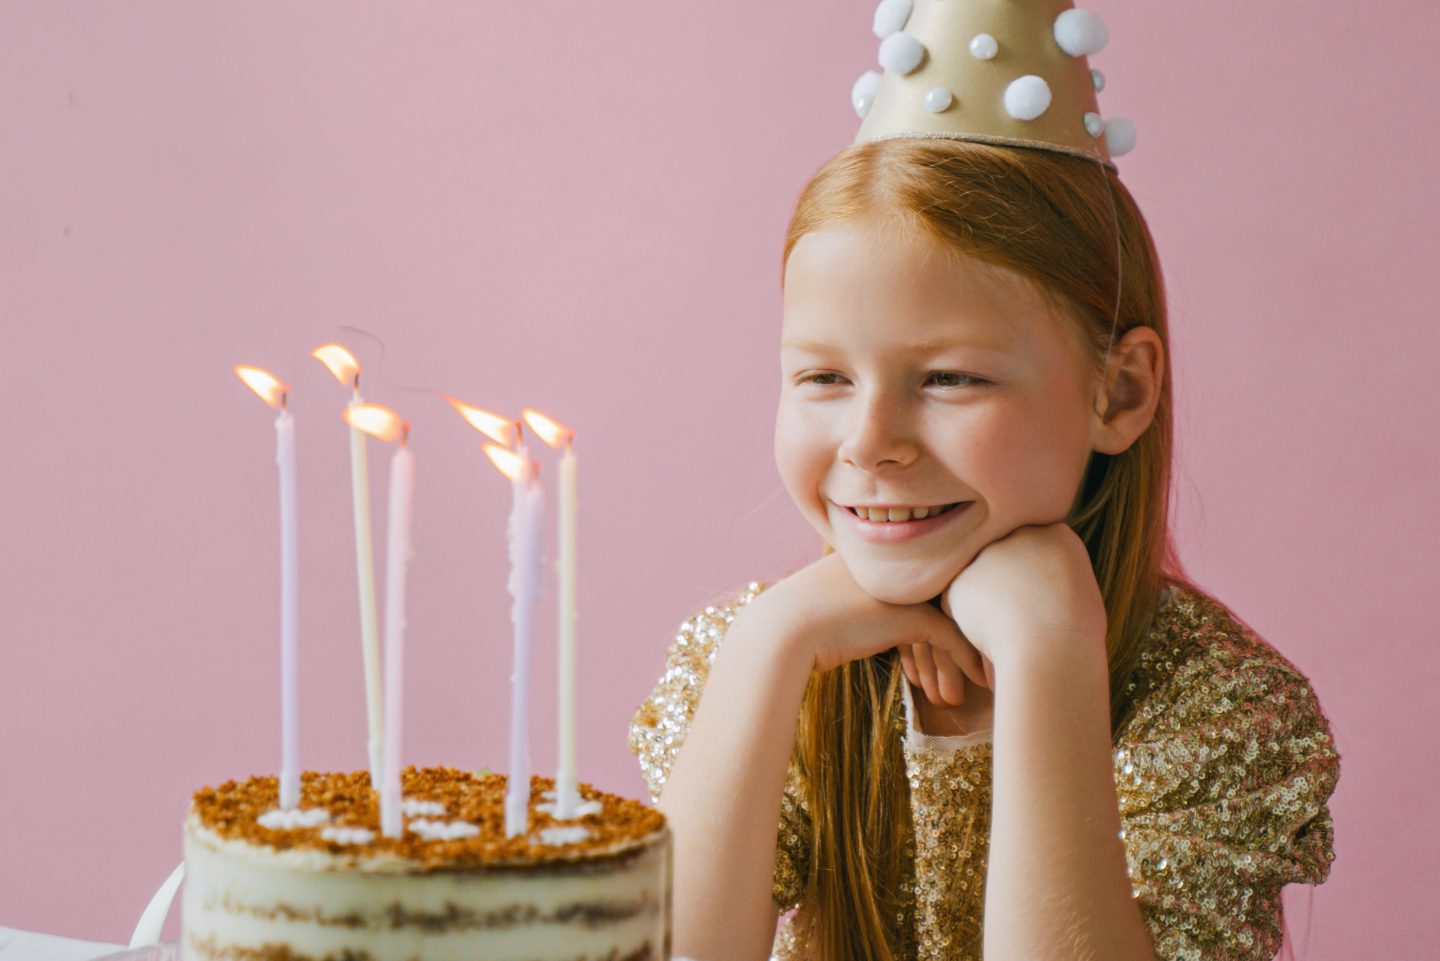 5 Ways To Treat Your Child To A Big Birthday Surprise